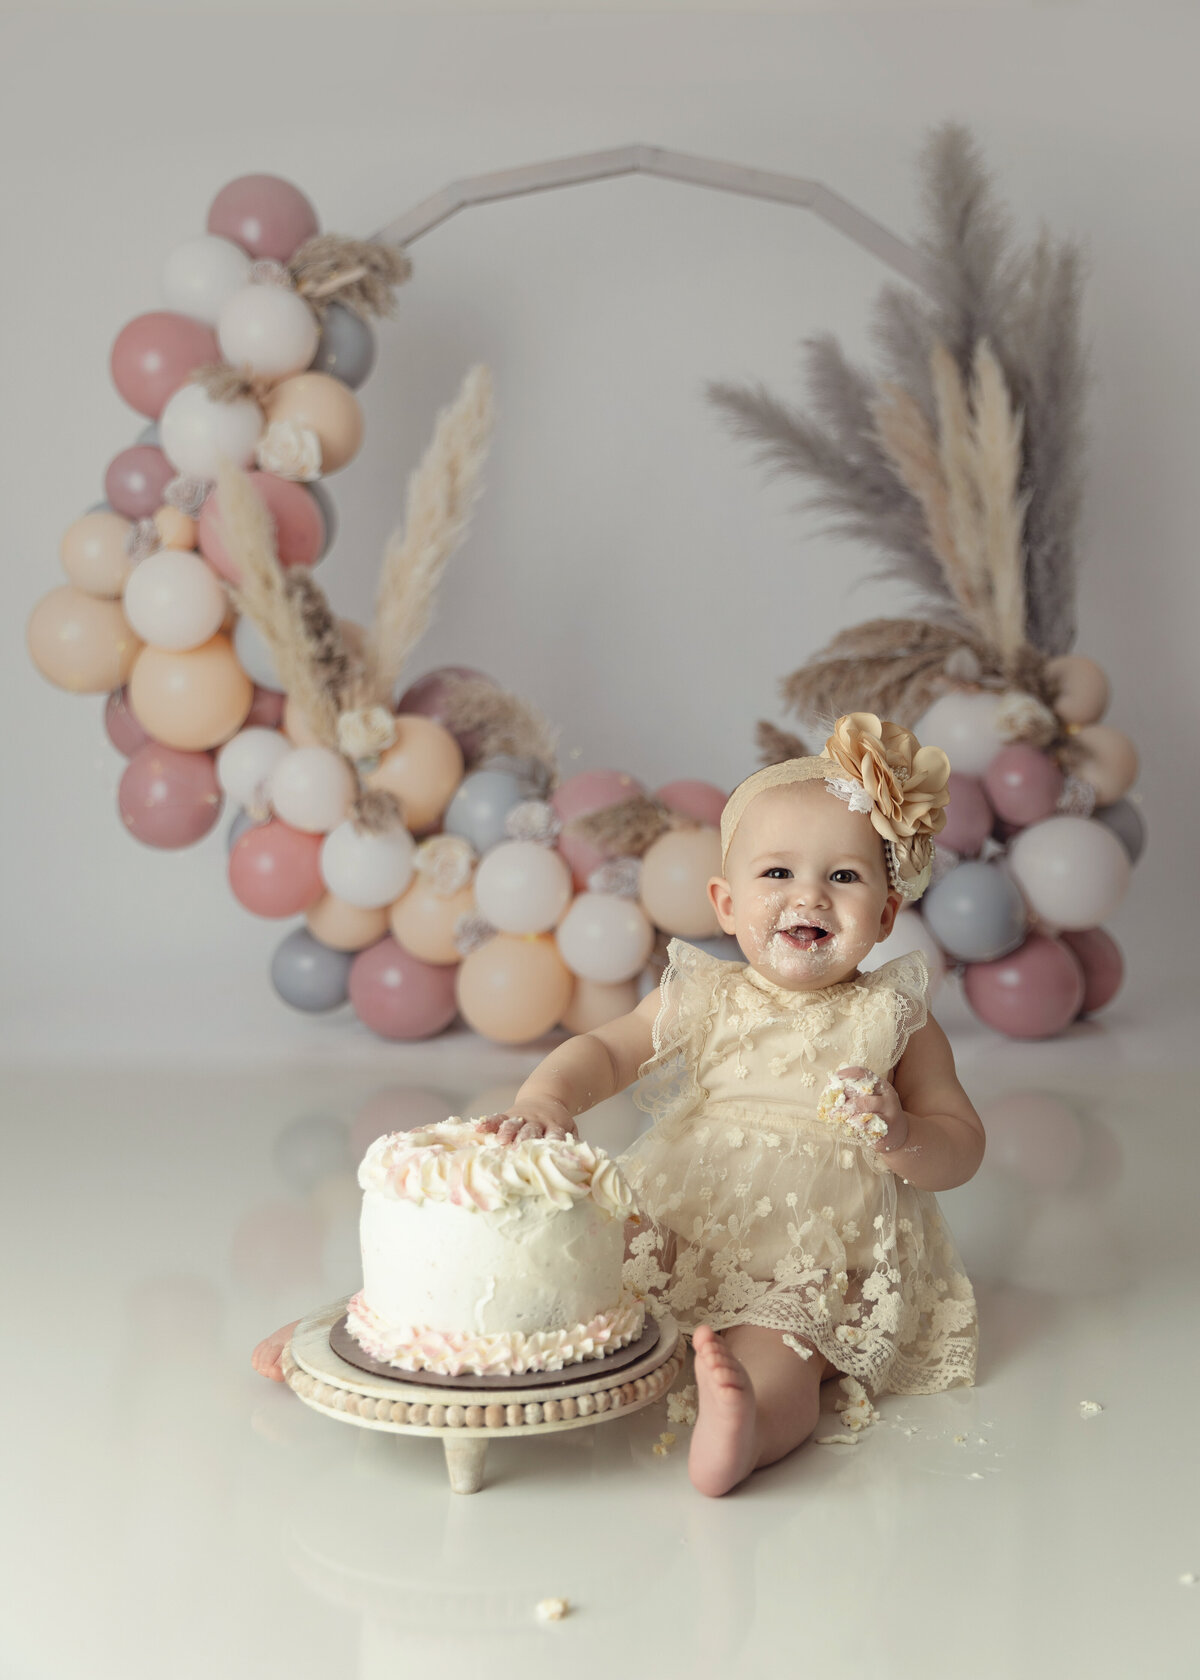 A toddler girl in a cream lace dress smiles while eating a white cake with a balloon backdrop